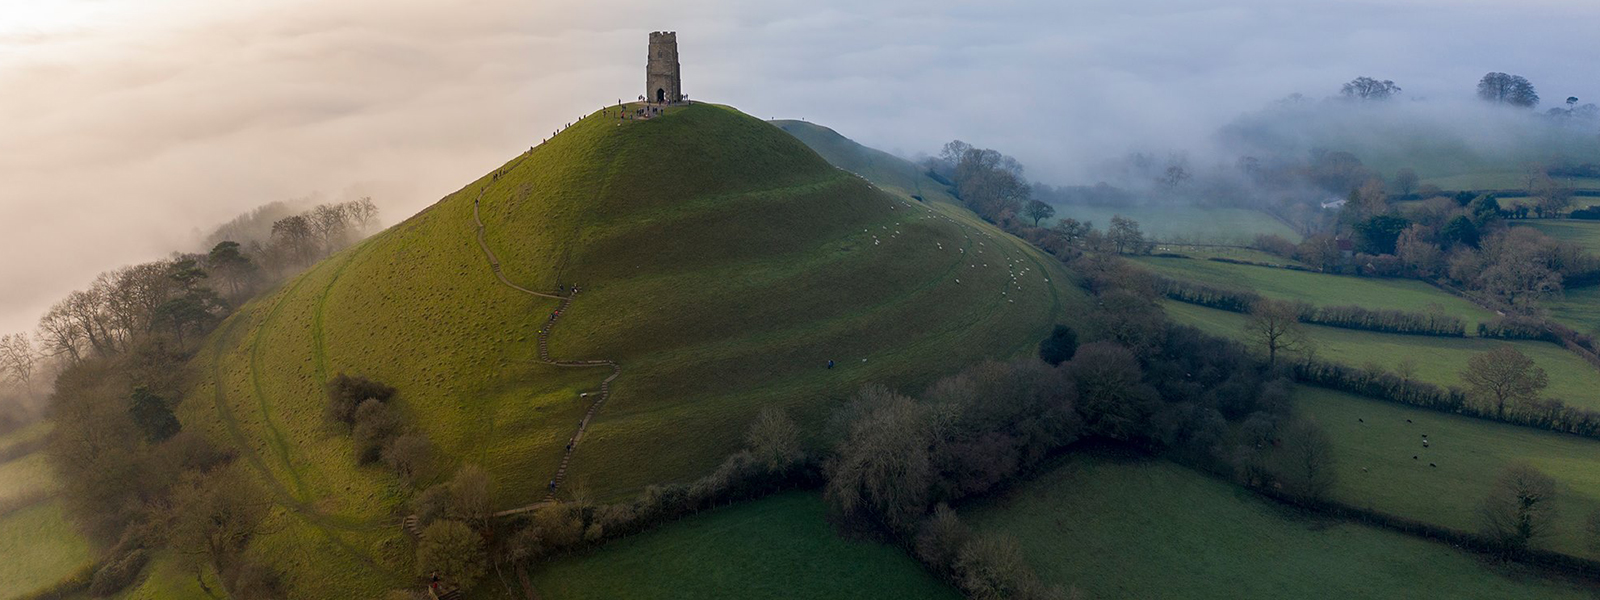 banner for locations of arthurian legend, featuring glastonbury tor